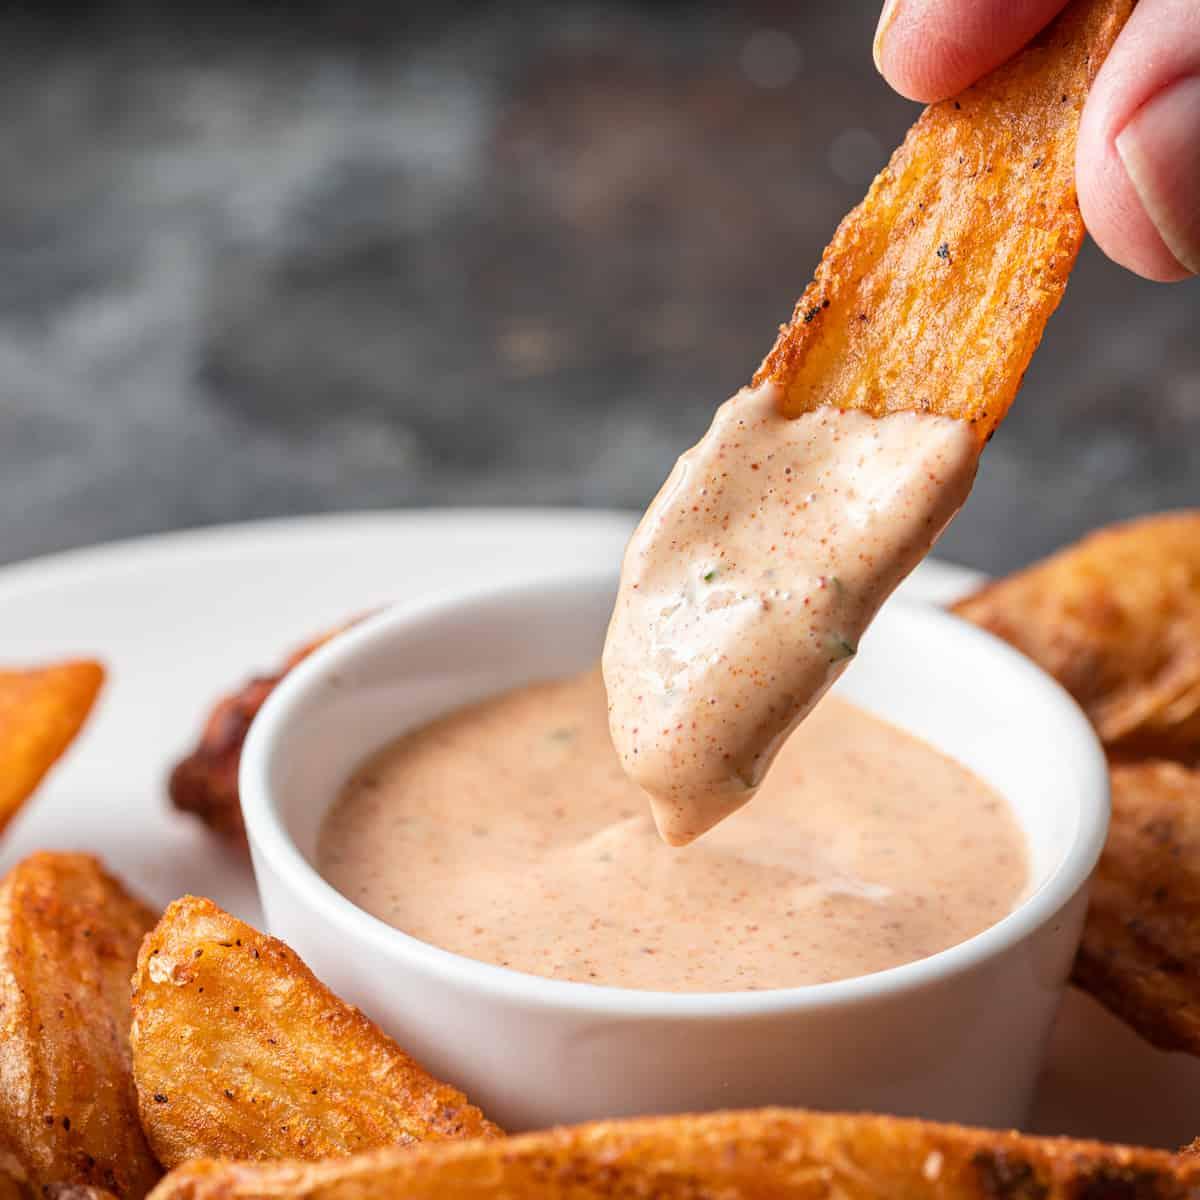 Potato wedge being dipped into Zesty Bistro Sauce